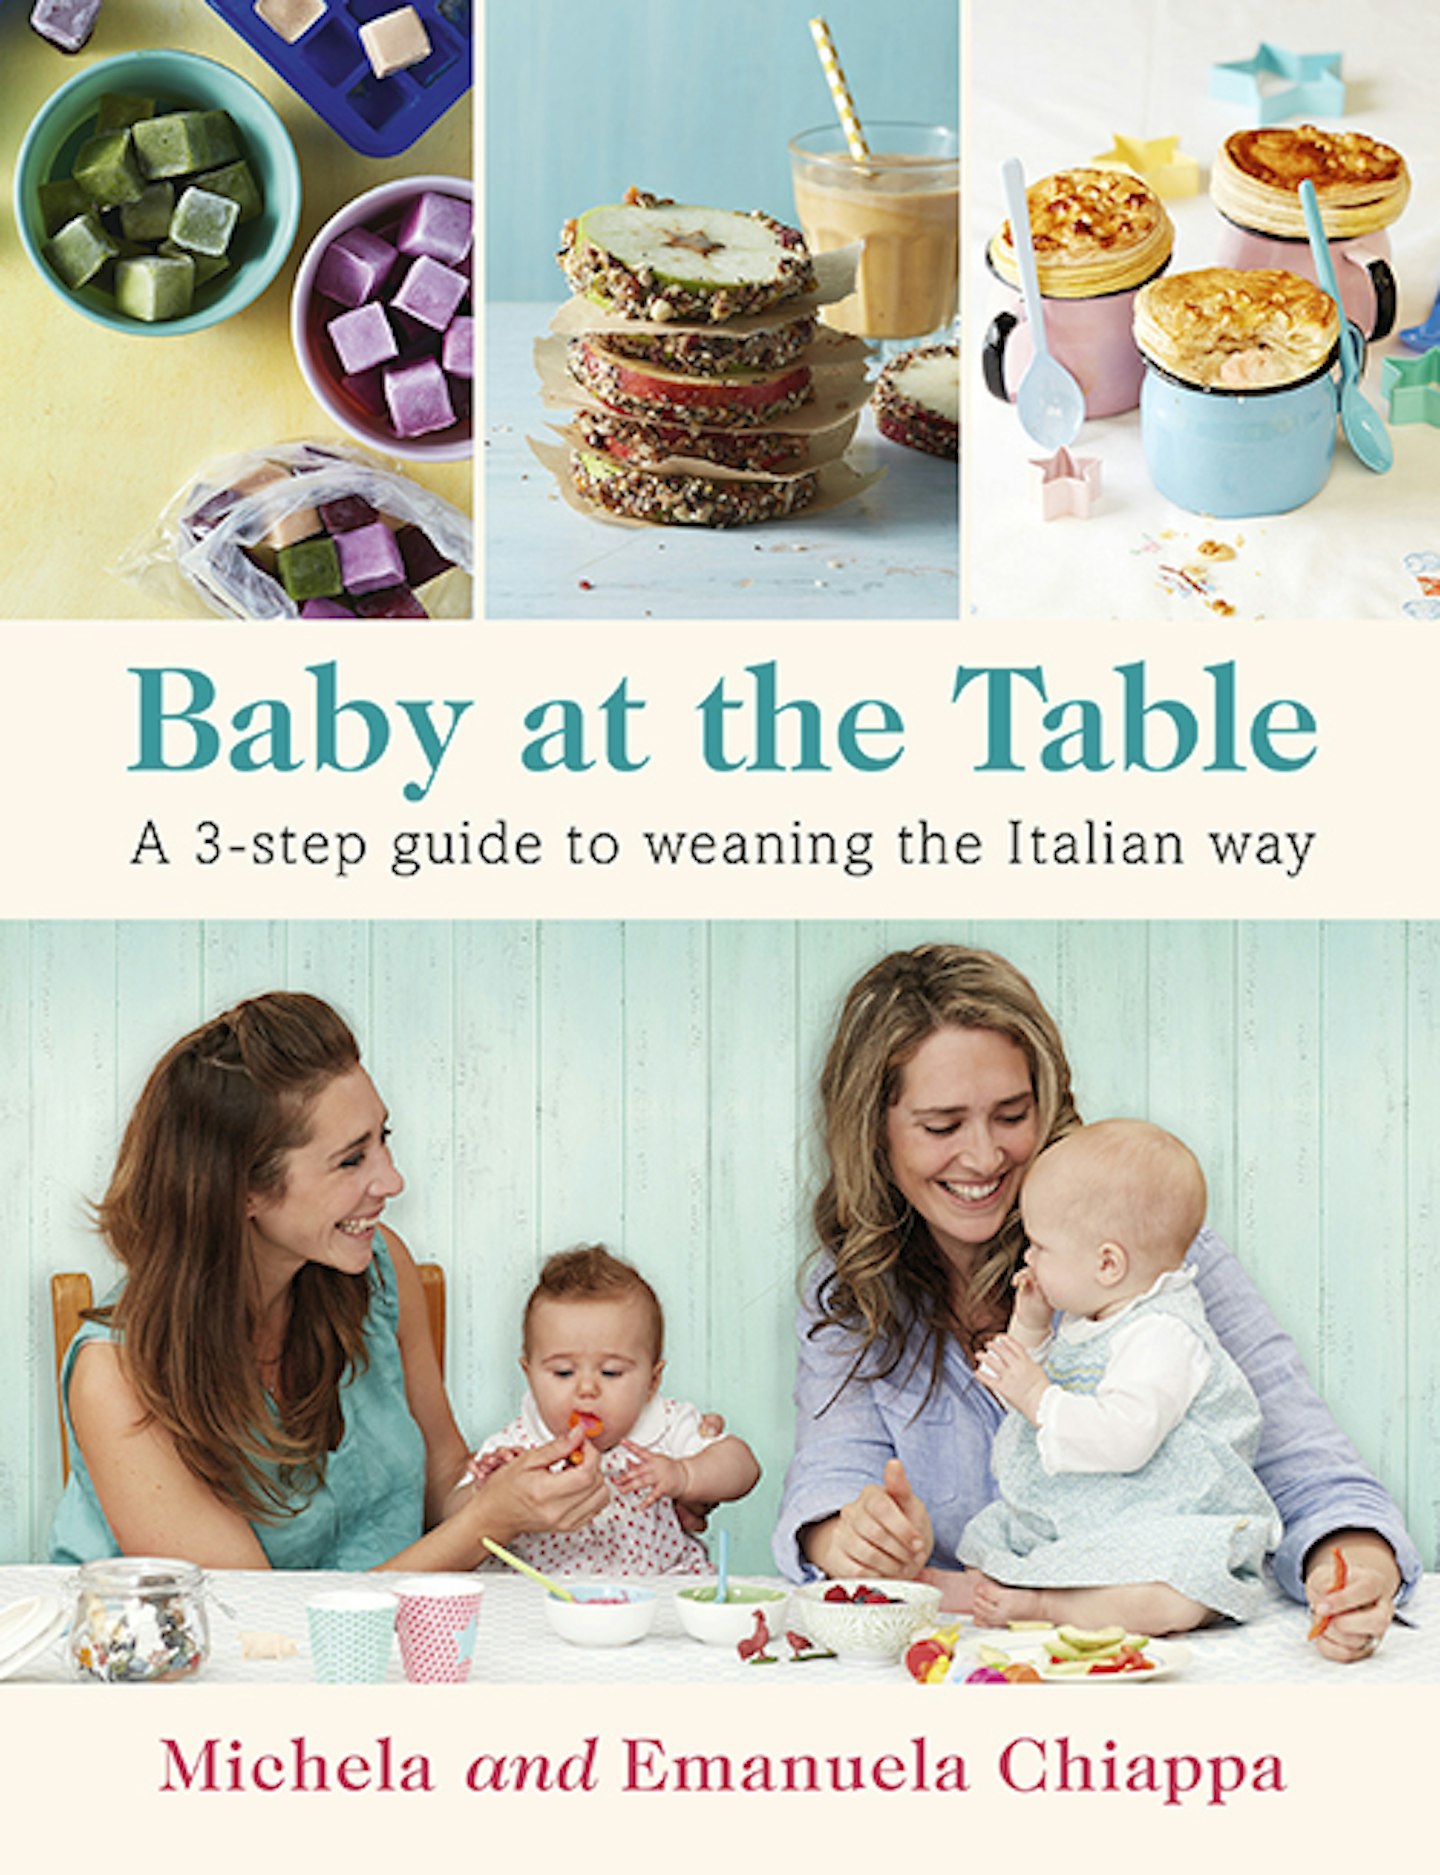 Win a copy of Baby at the Table!